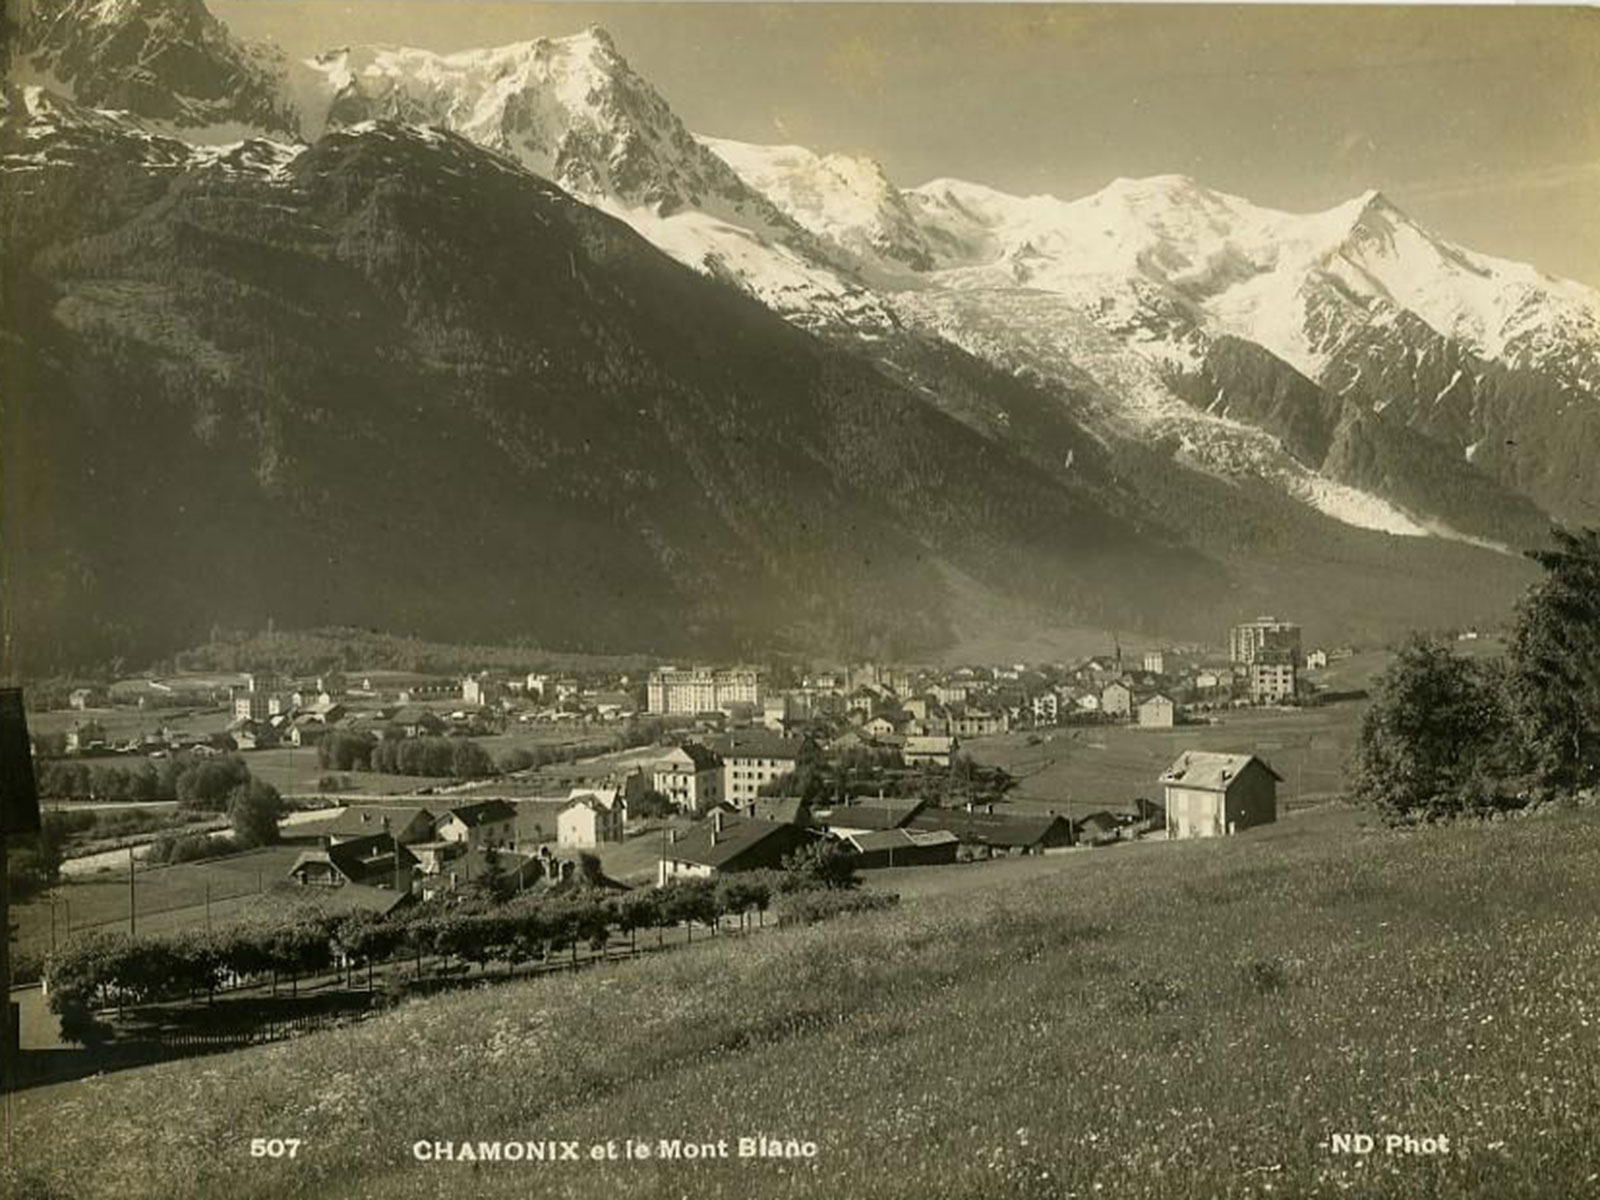 Chamonix History and the History of the Mont Blanc Valley